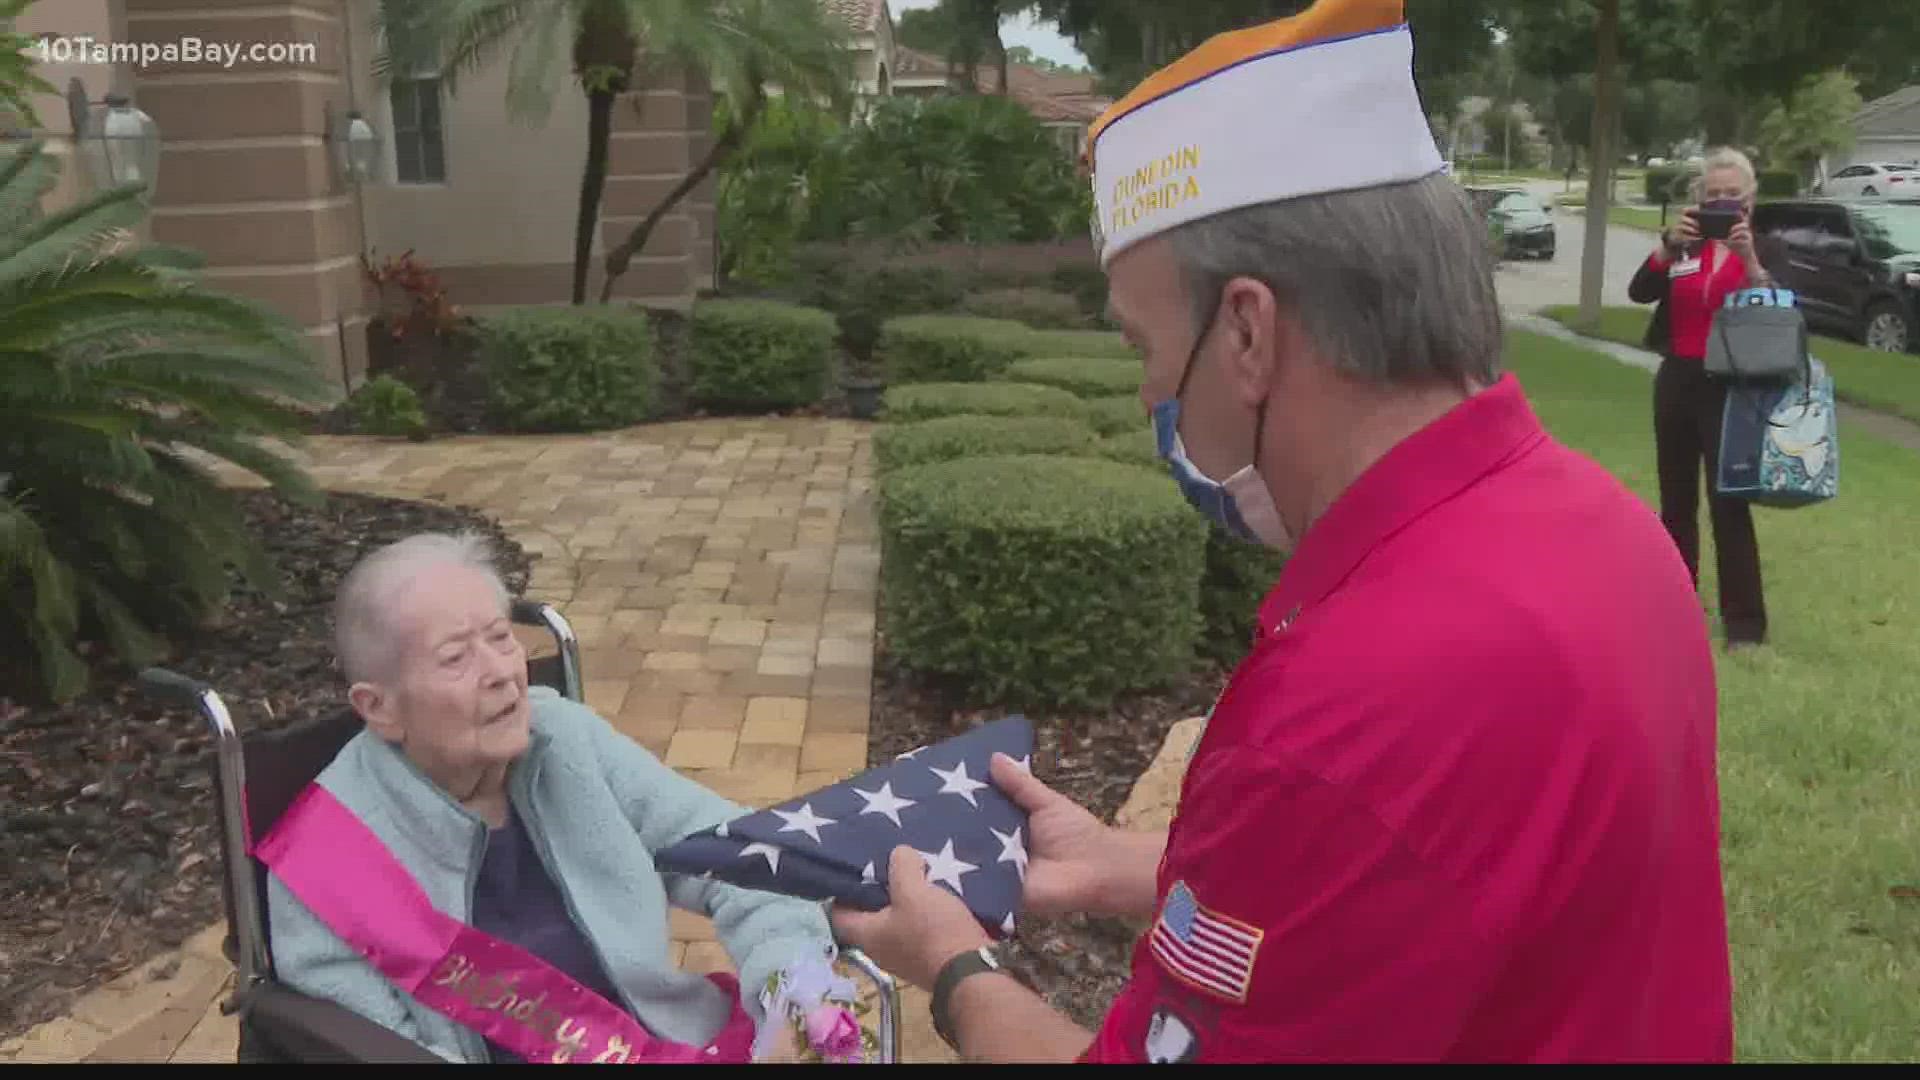 Anna Bauer joined the Army as a nurse during WWII. Dozens of friends and strangers honored her with a birthday parade on Tuesday.